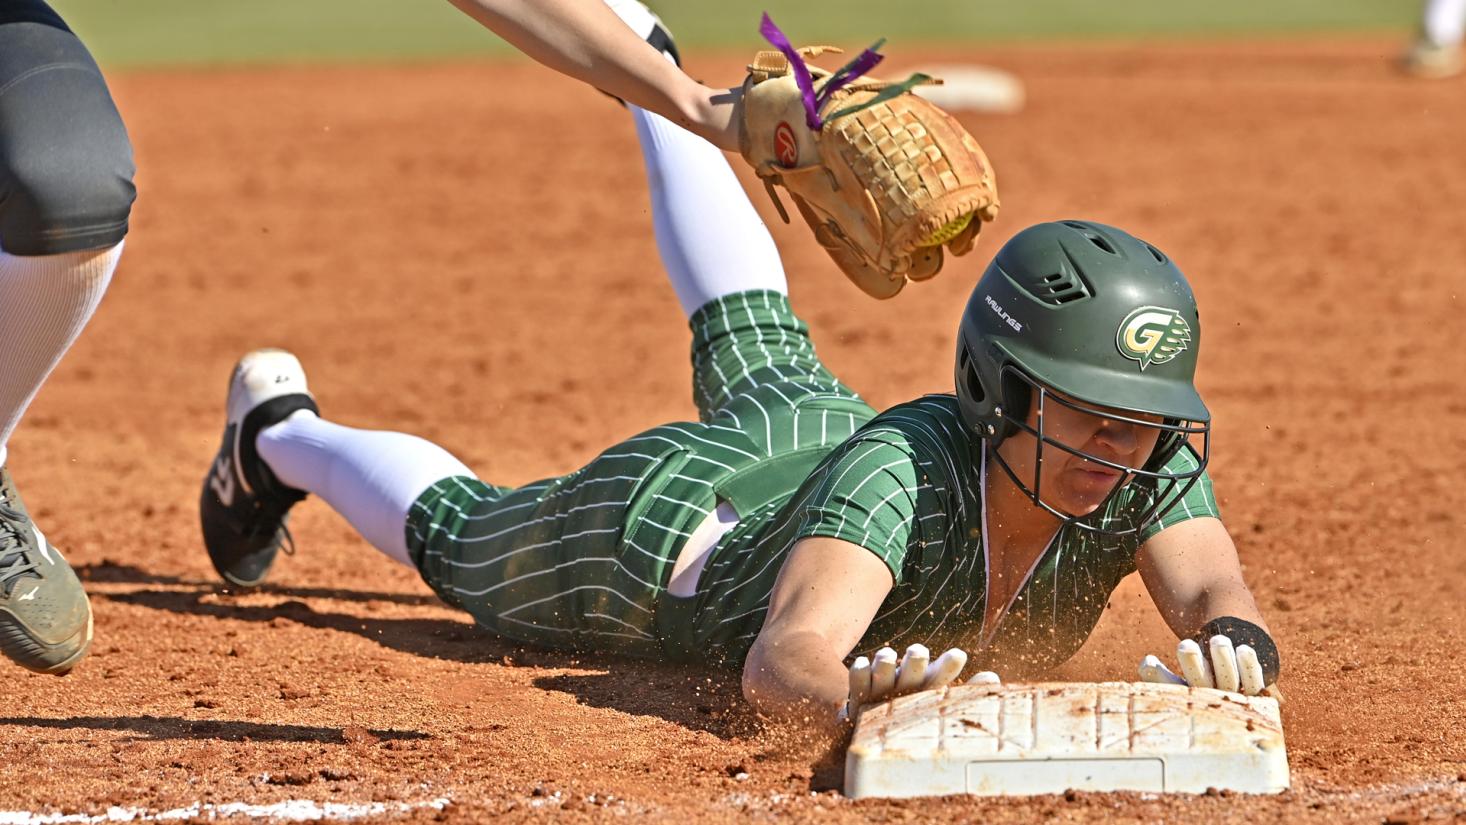 action photo of softball player playing in a game